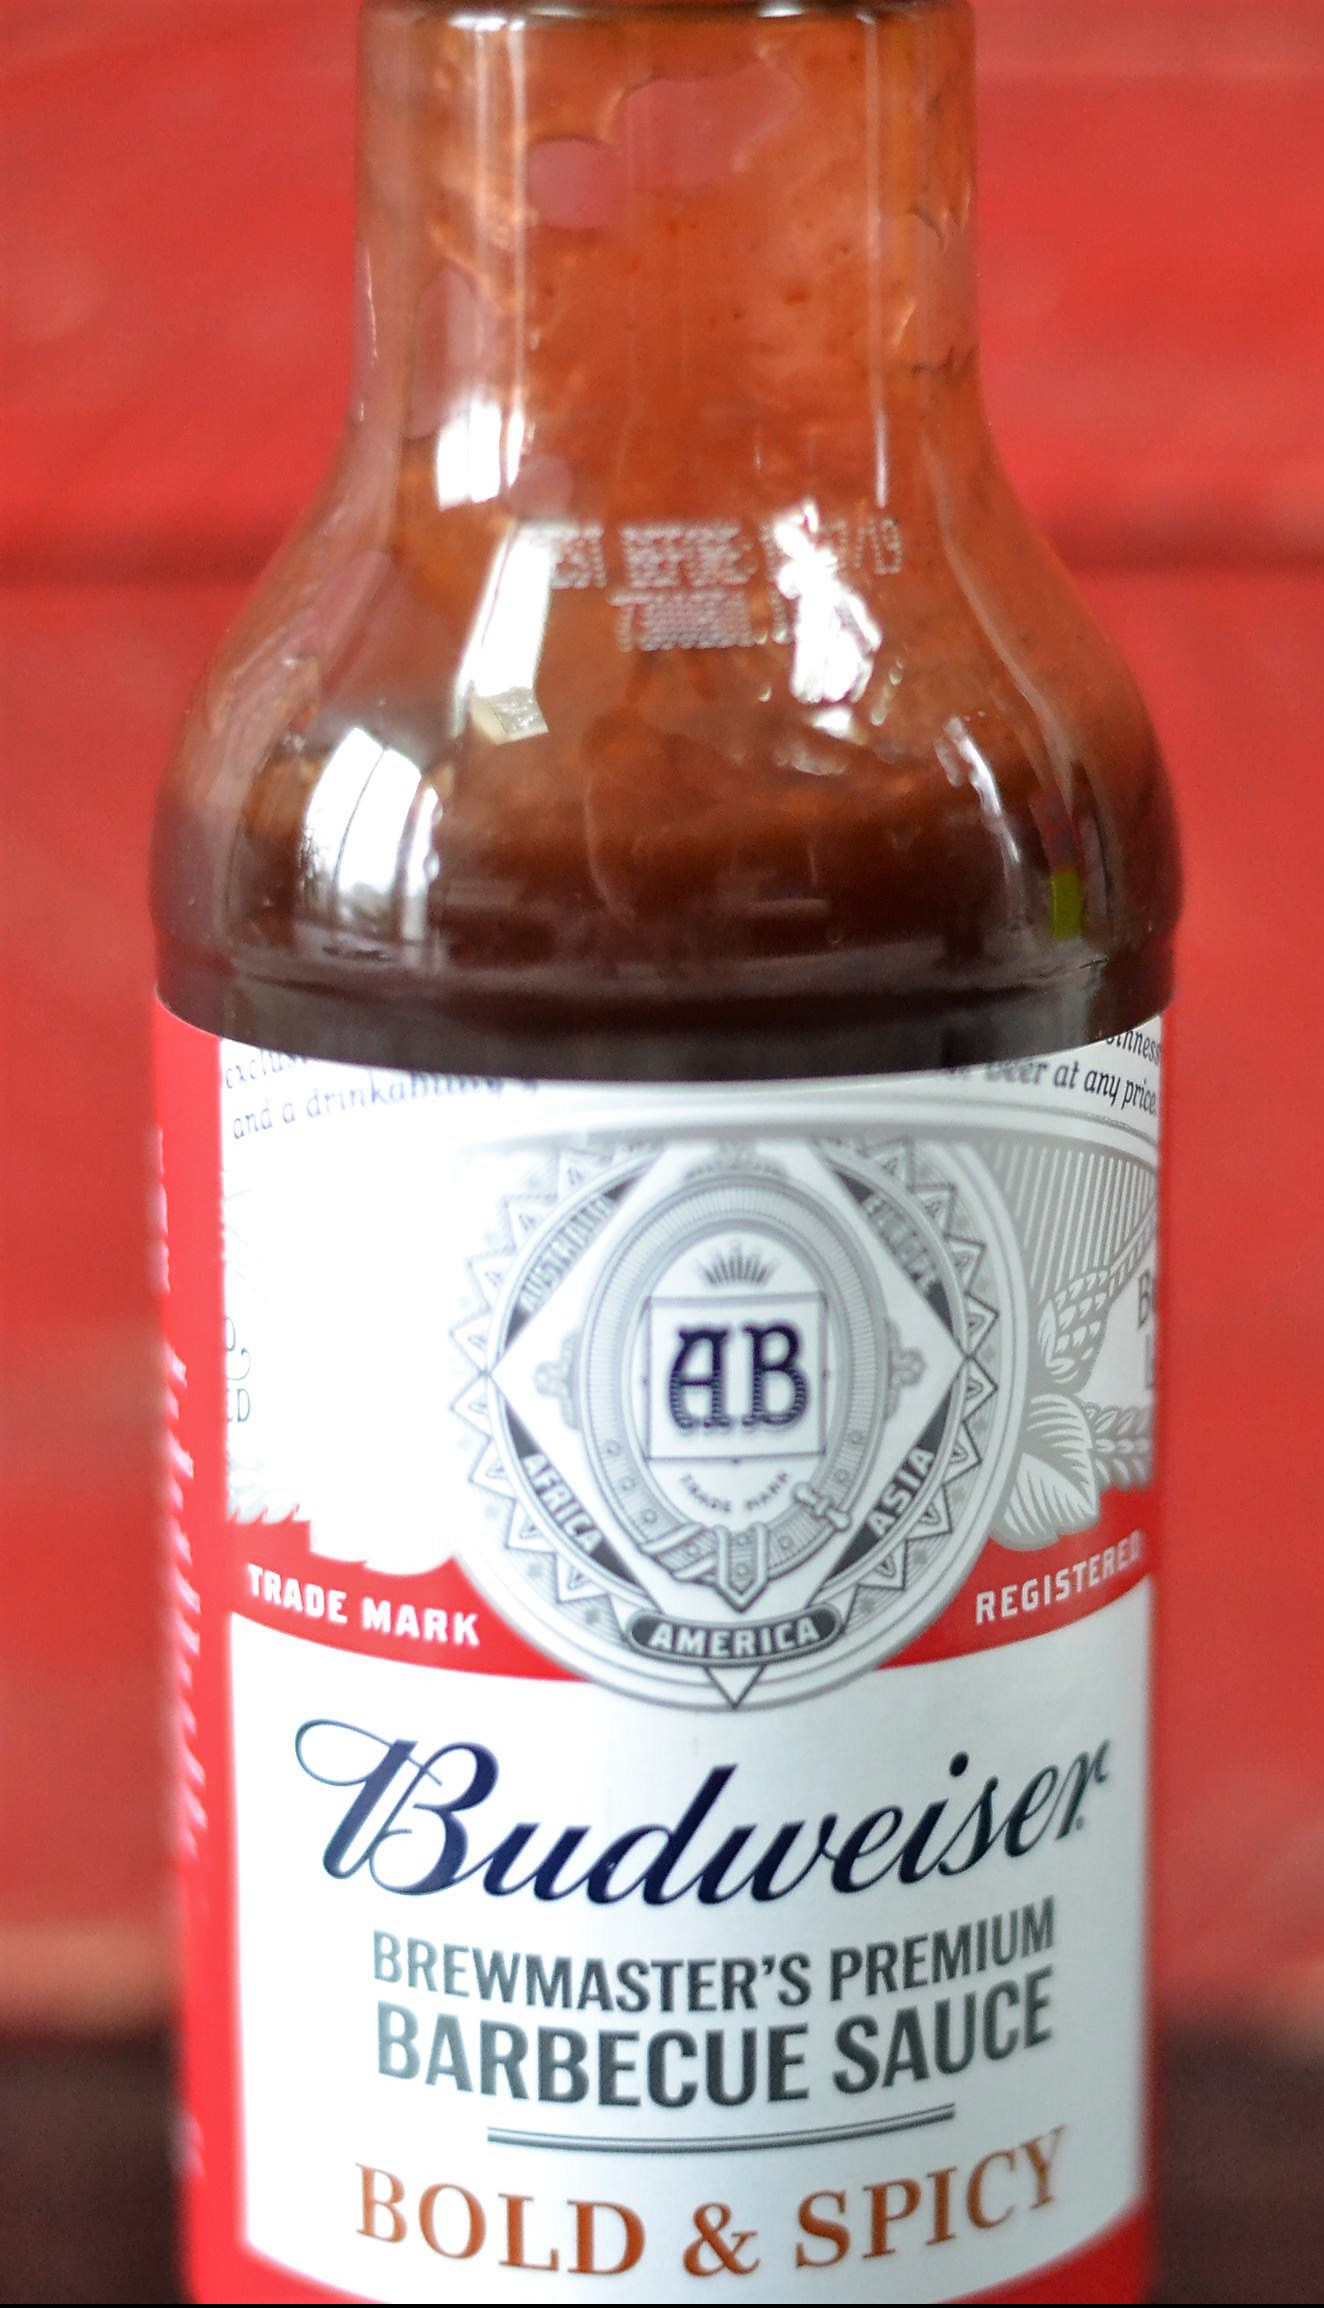 Budweiser-Bold-and-Spicy-Barbecue-Sauce.jpg